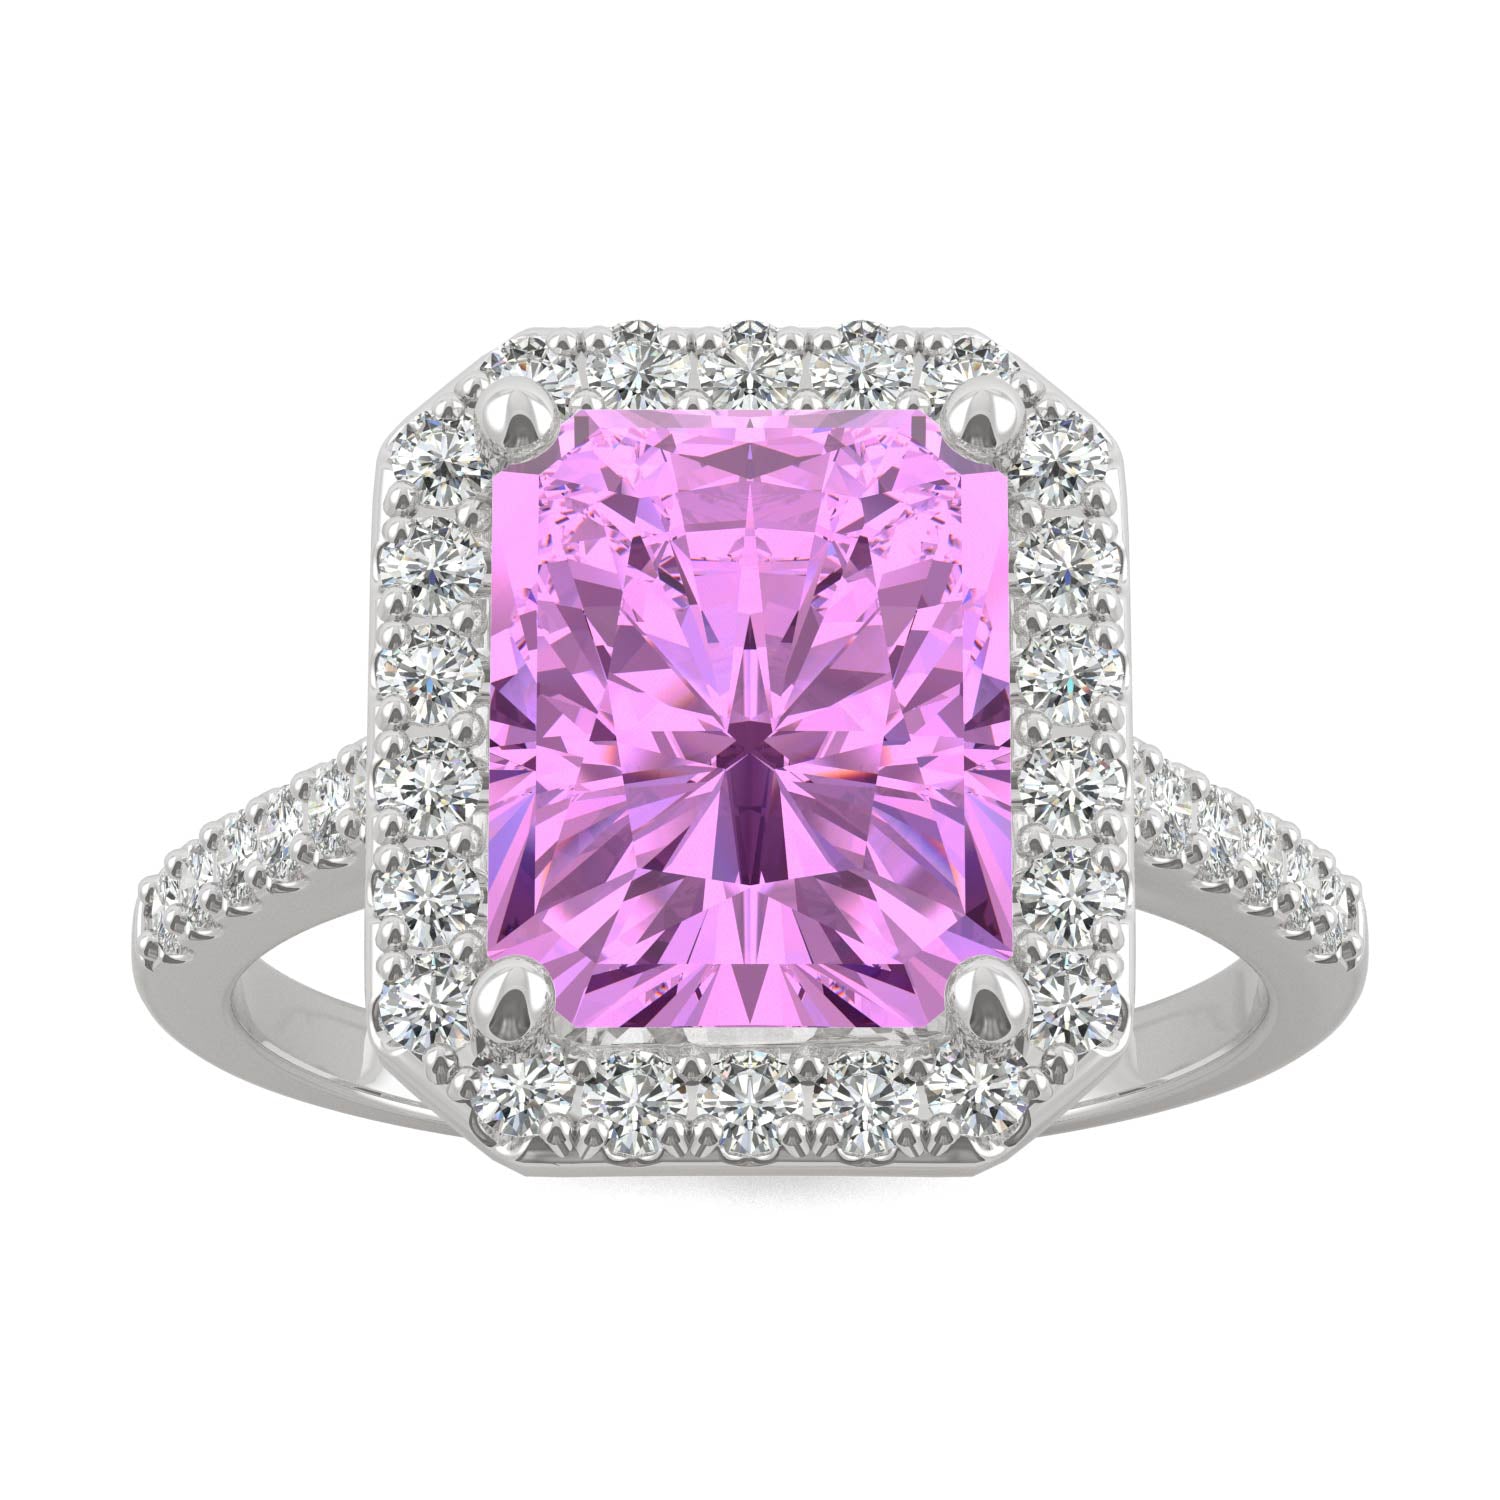 4.51 CTW DEW Radiant Pink Sapphire Halo Ring in 14K White Gold